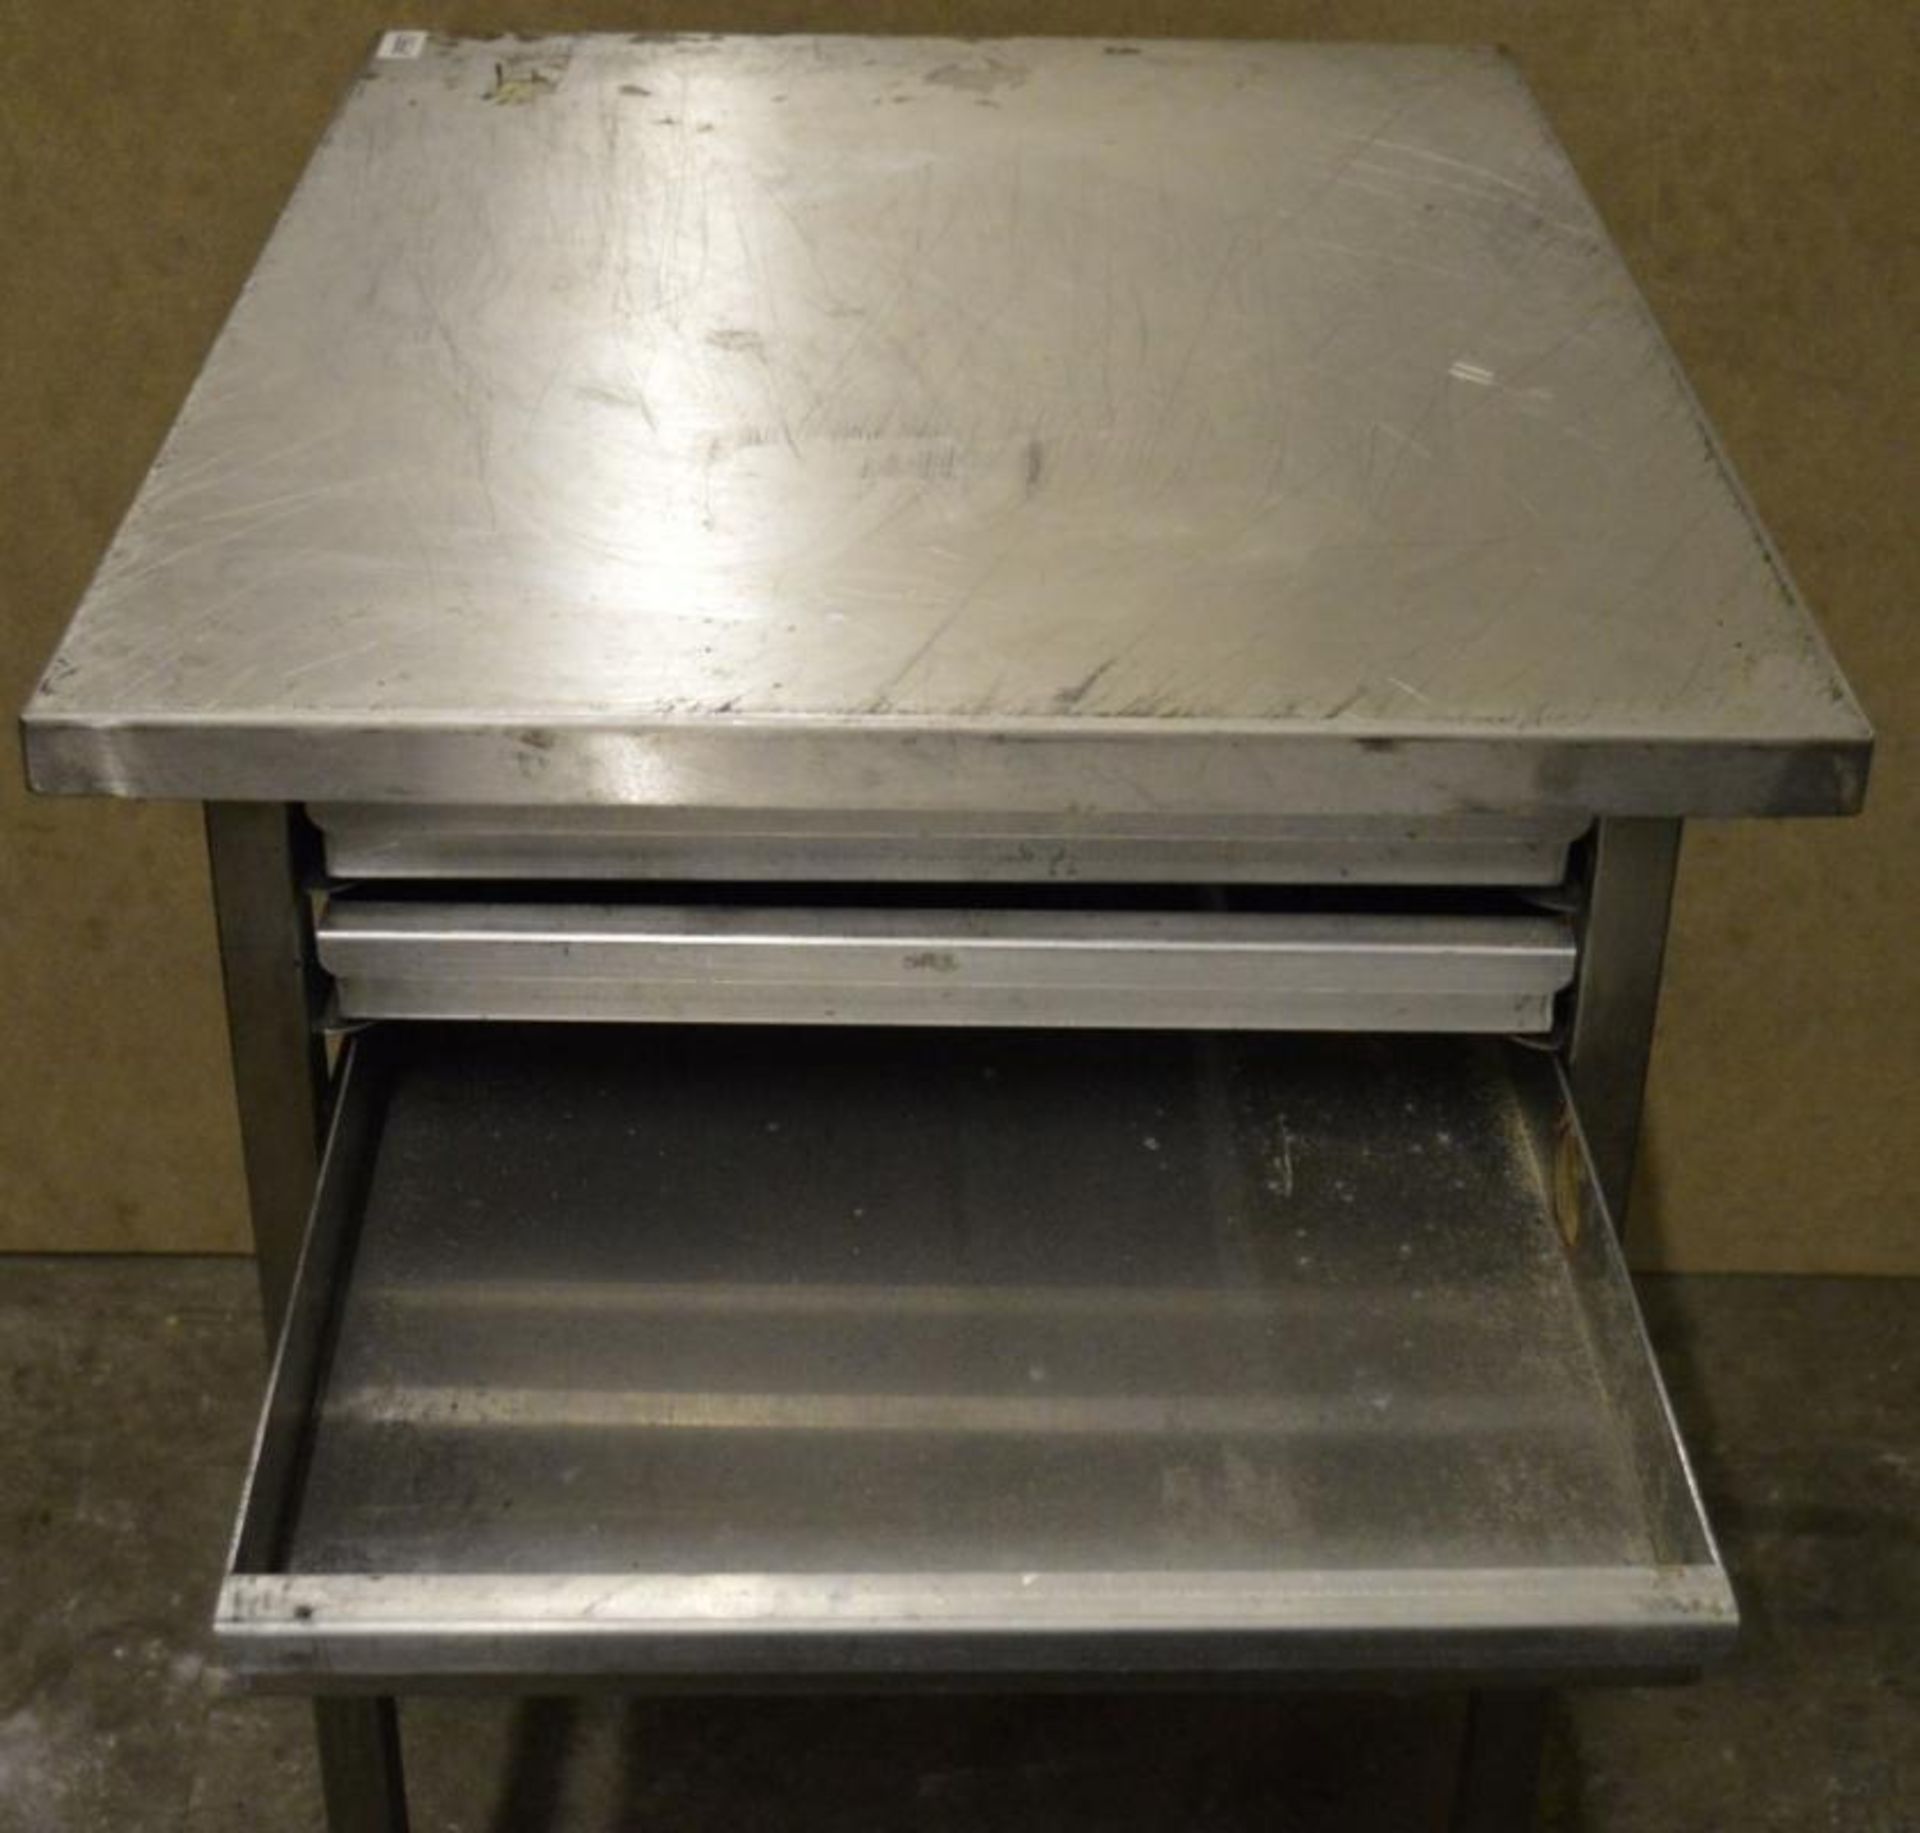 1 x Stainless Steel Bakers Preperation Table With Integrated Drawer System and Three Drawers - H87 x - Image 5 of 5